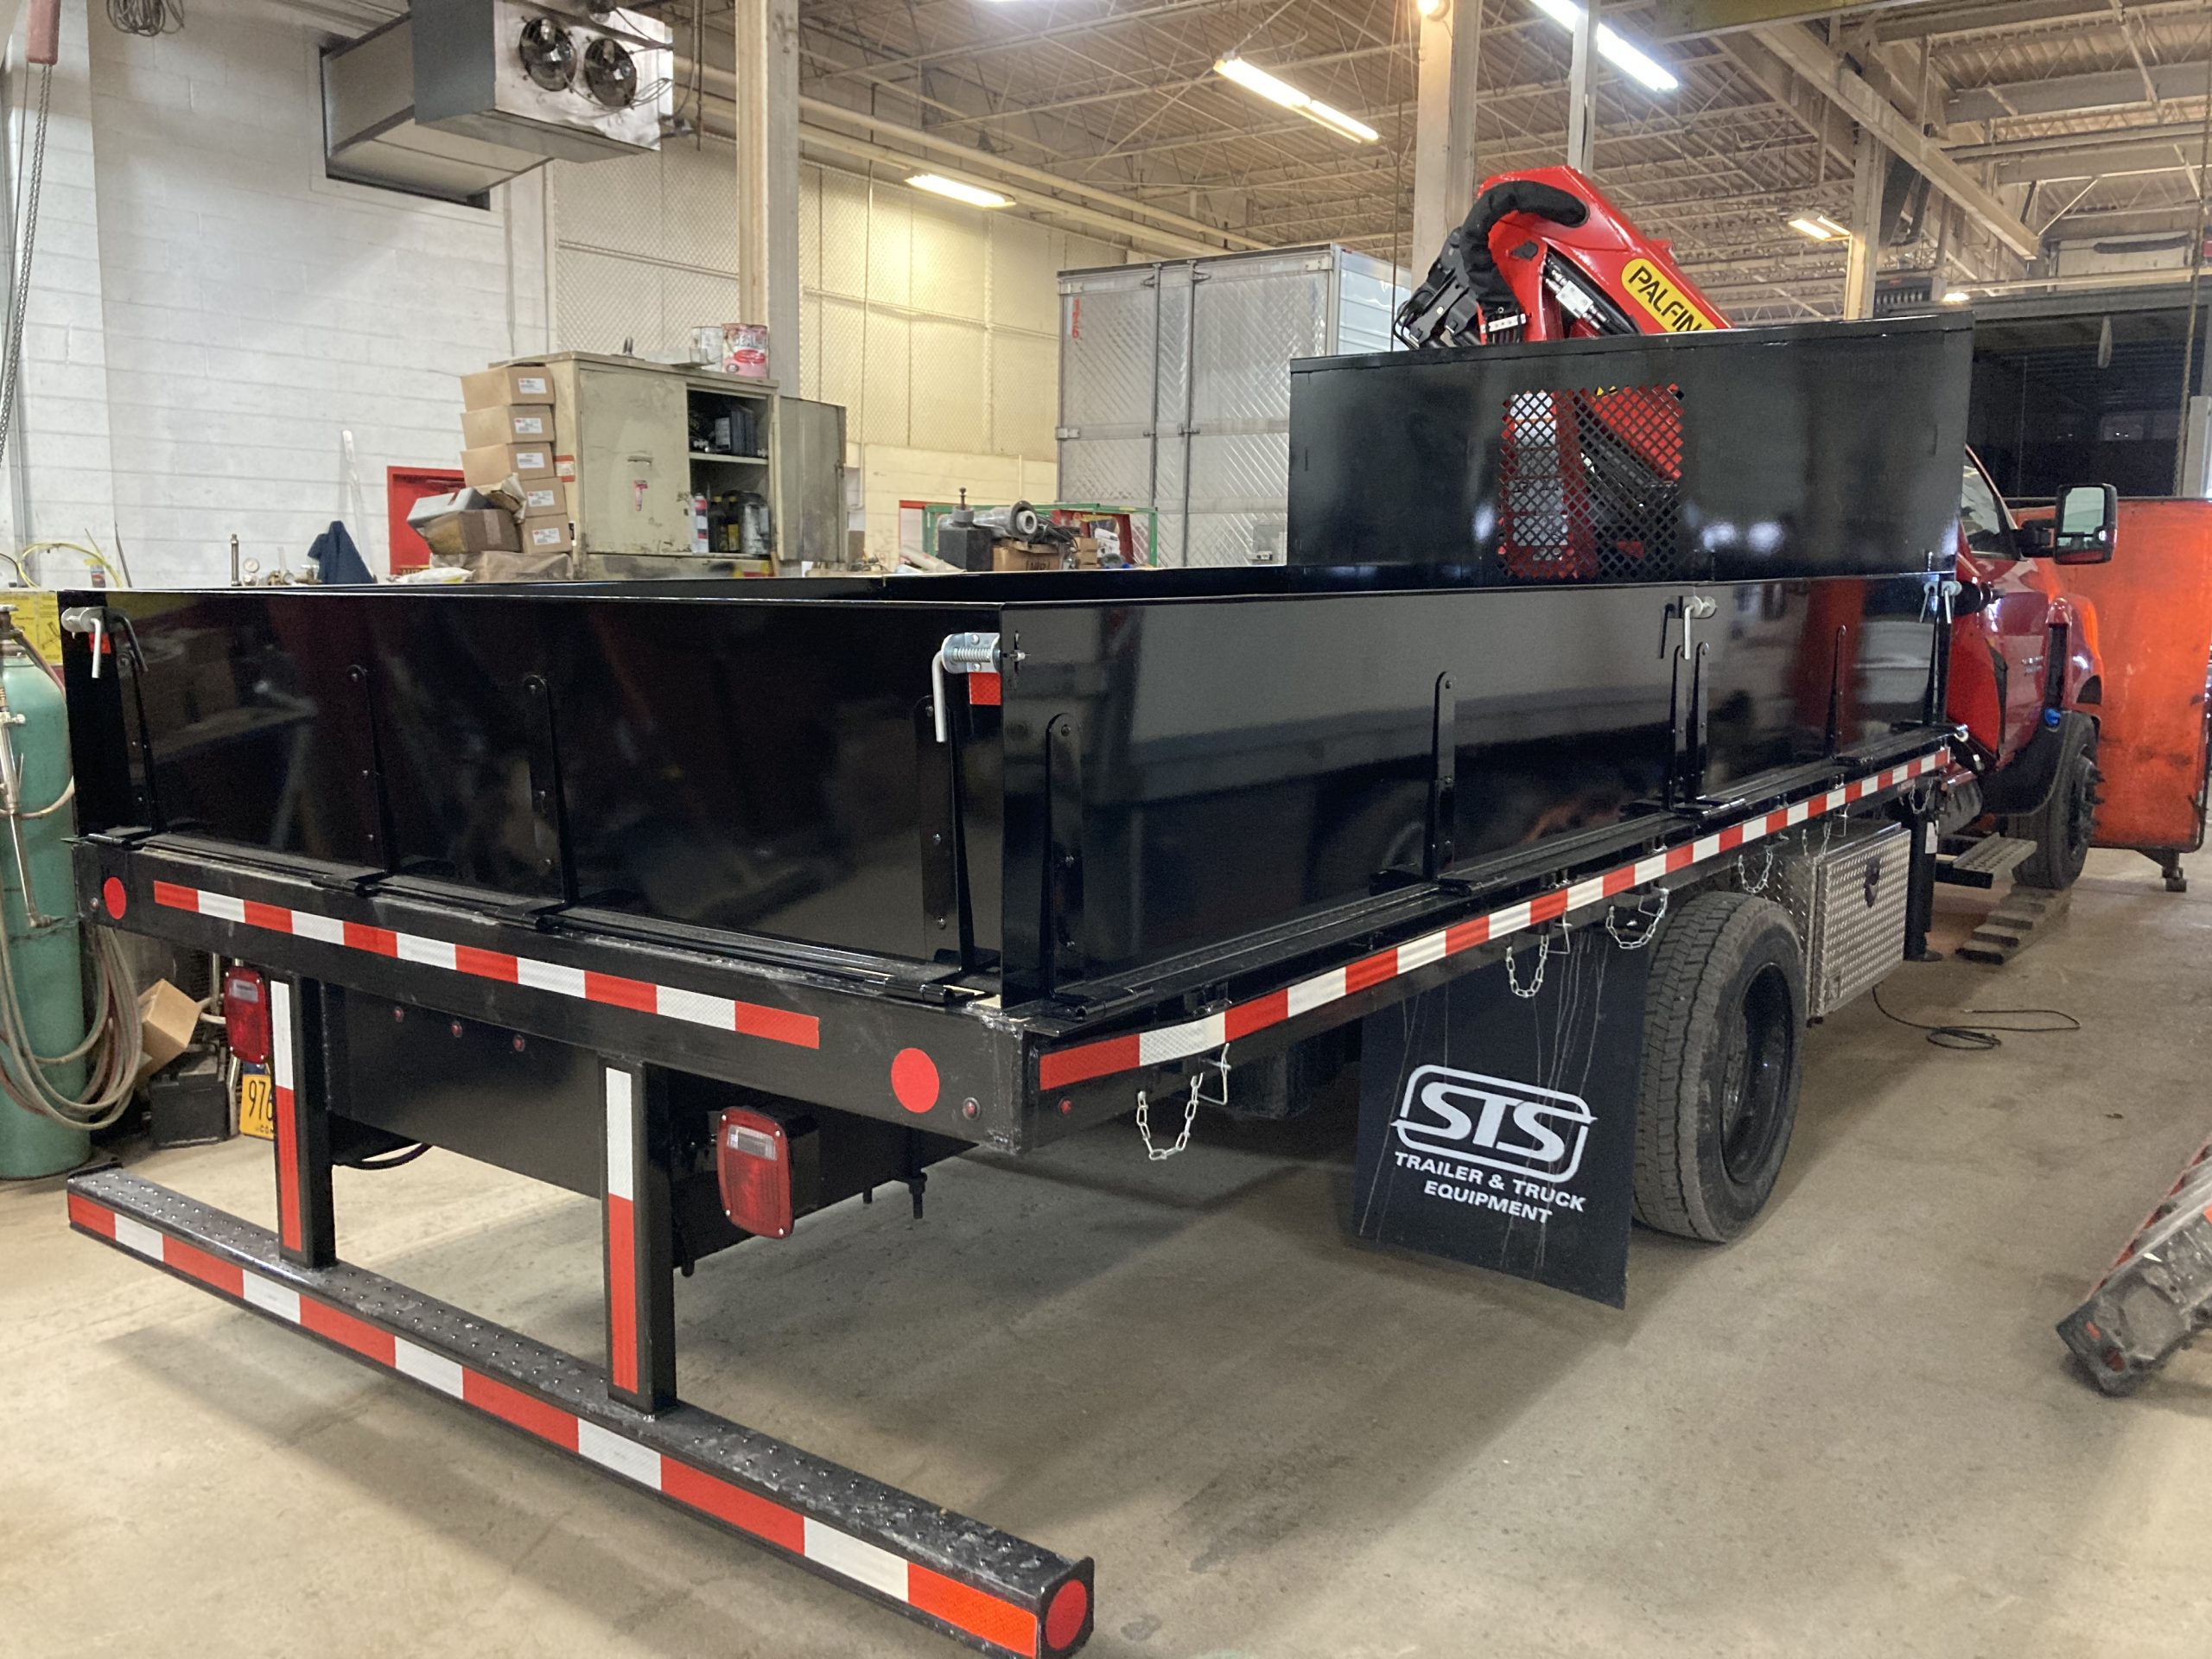 It’s a Morgan flatbed with a Palfinger crane and we built those sides.